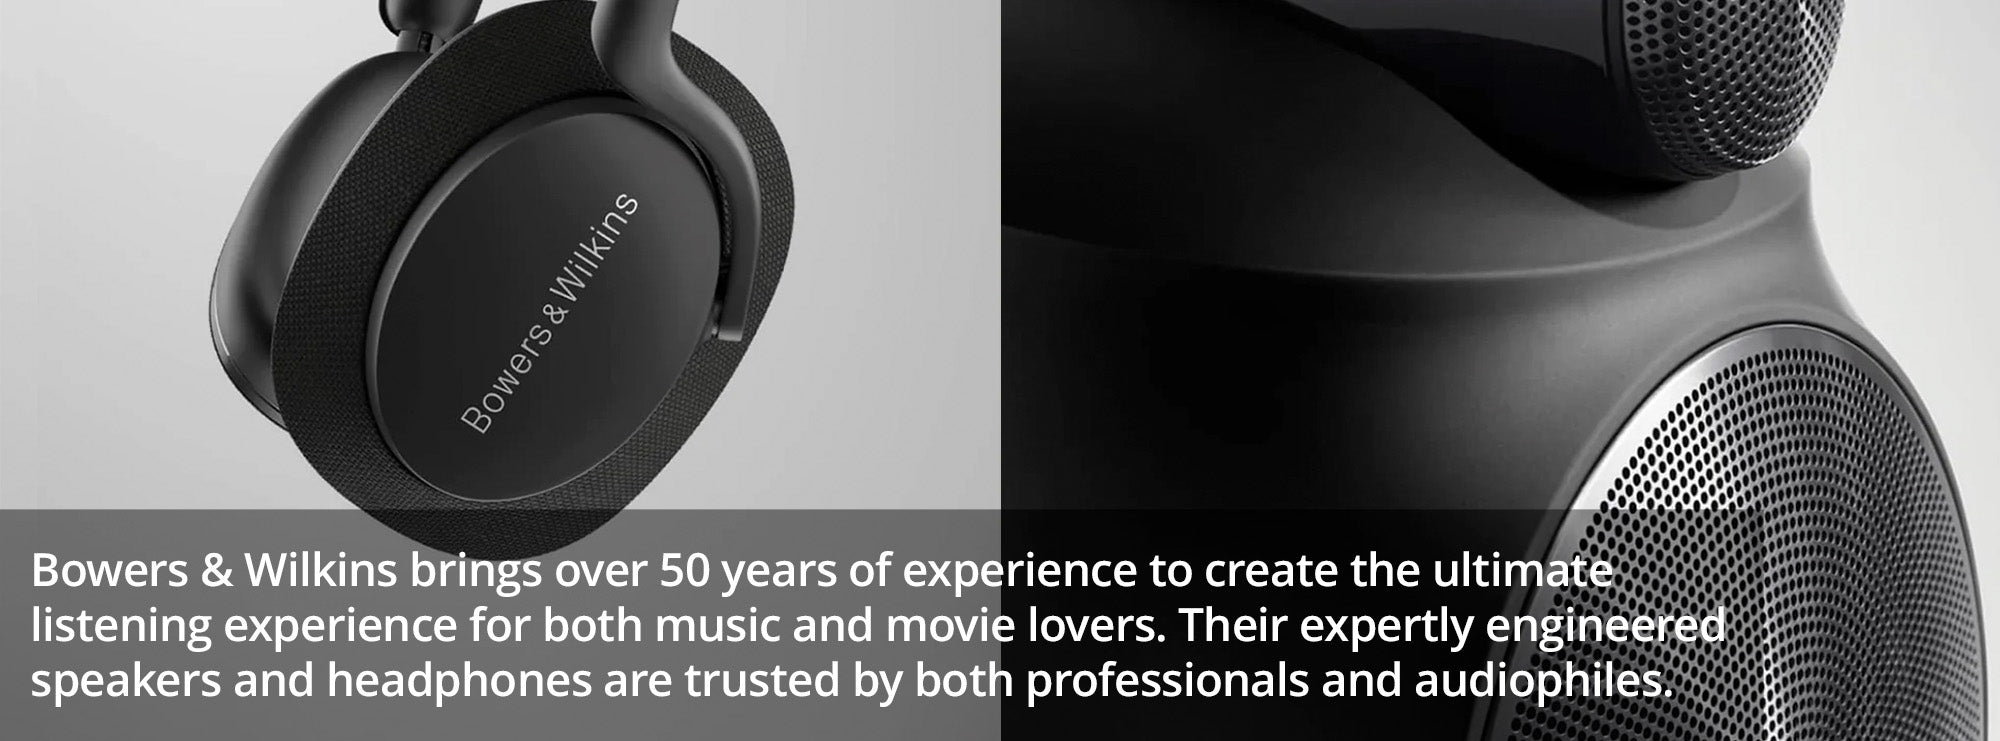 Bowers & Wilkins brings over 50 years of experience to create the ultimate listening experience for both music and movie lovers. Their expertly engineered speakers and headphones are trusted by both professionals and audiophiles.